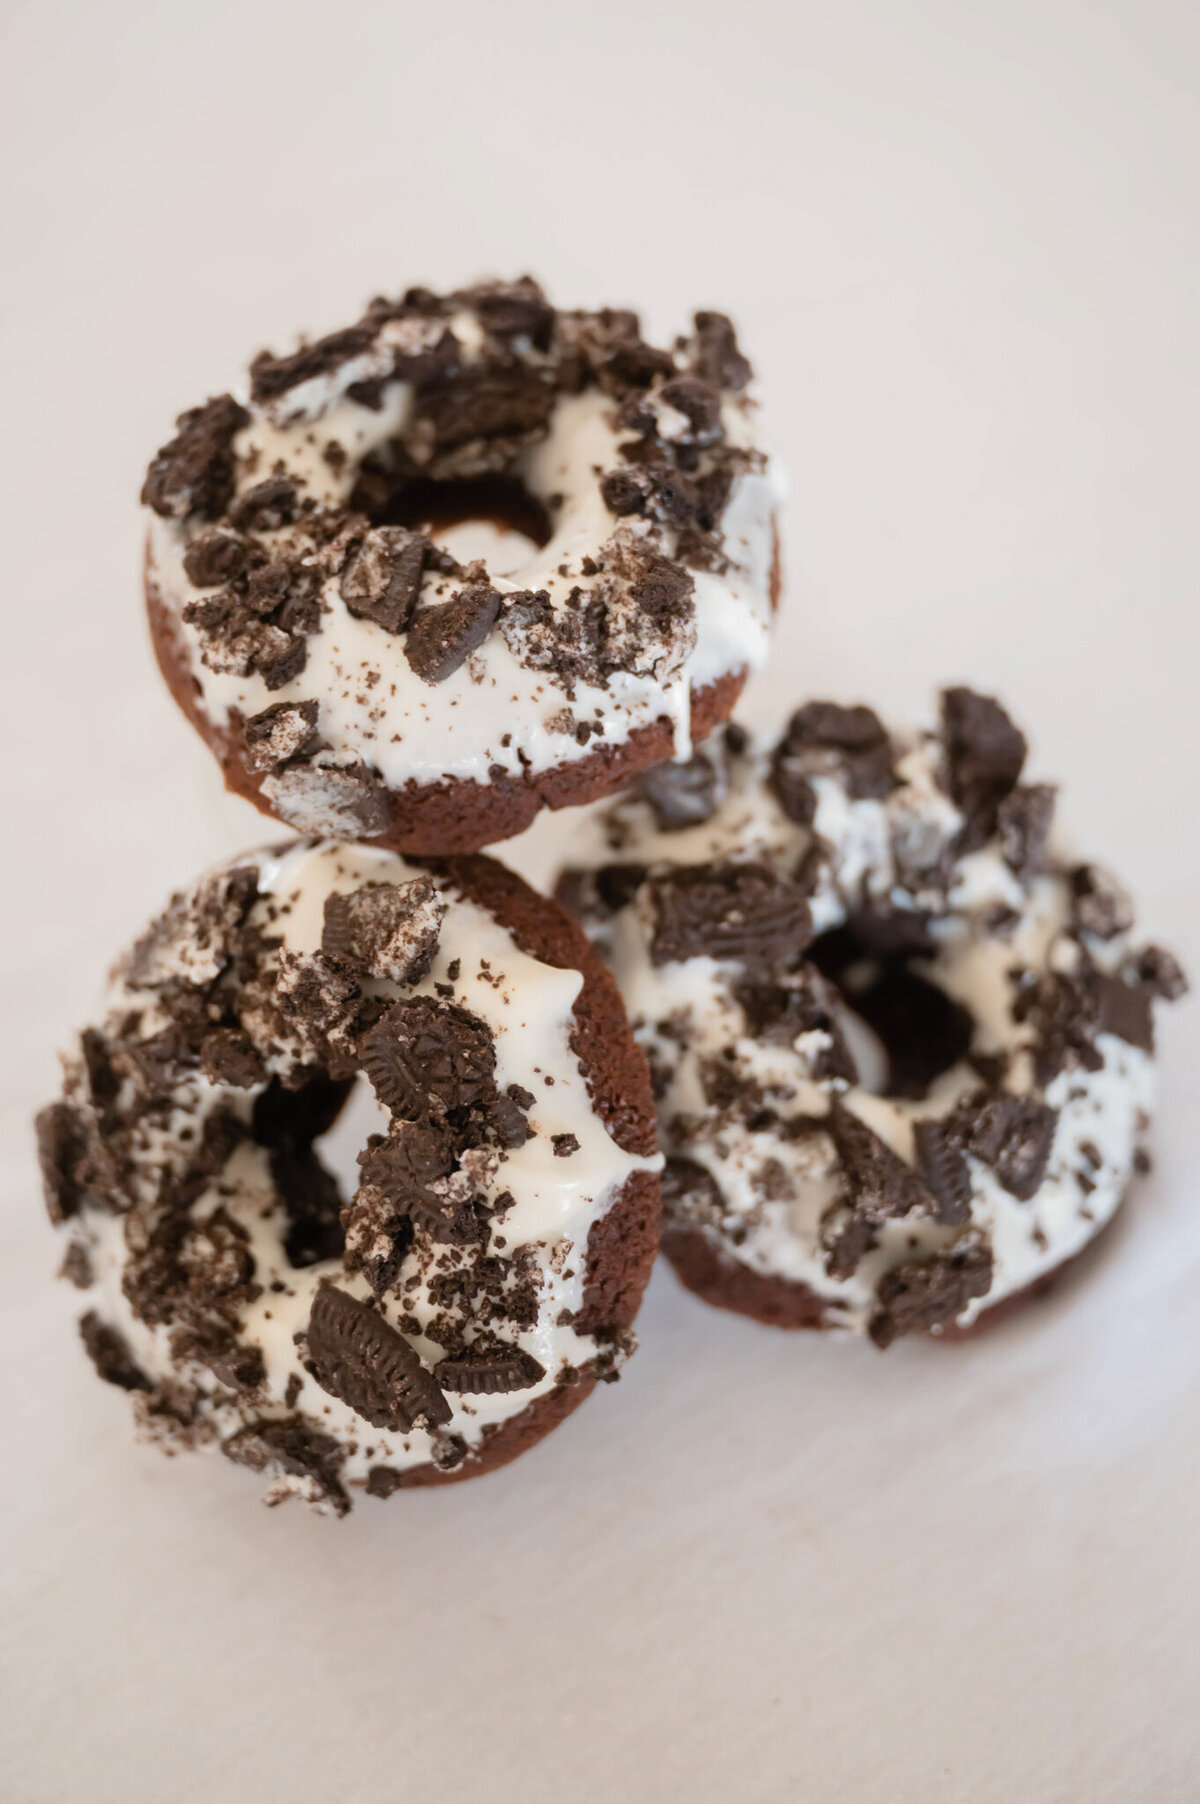 Oreo donuts, created by Sweets By Sue in Lethbridge, Alberta